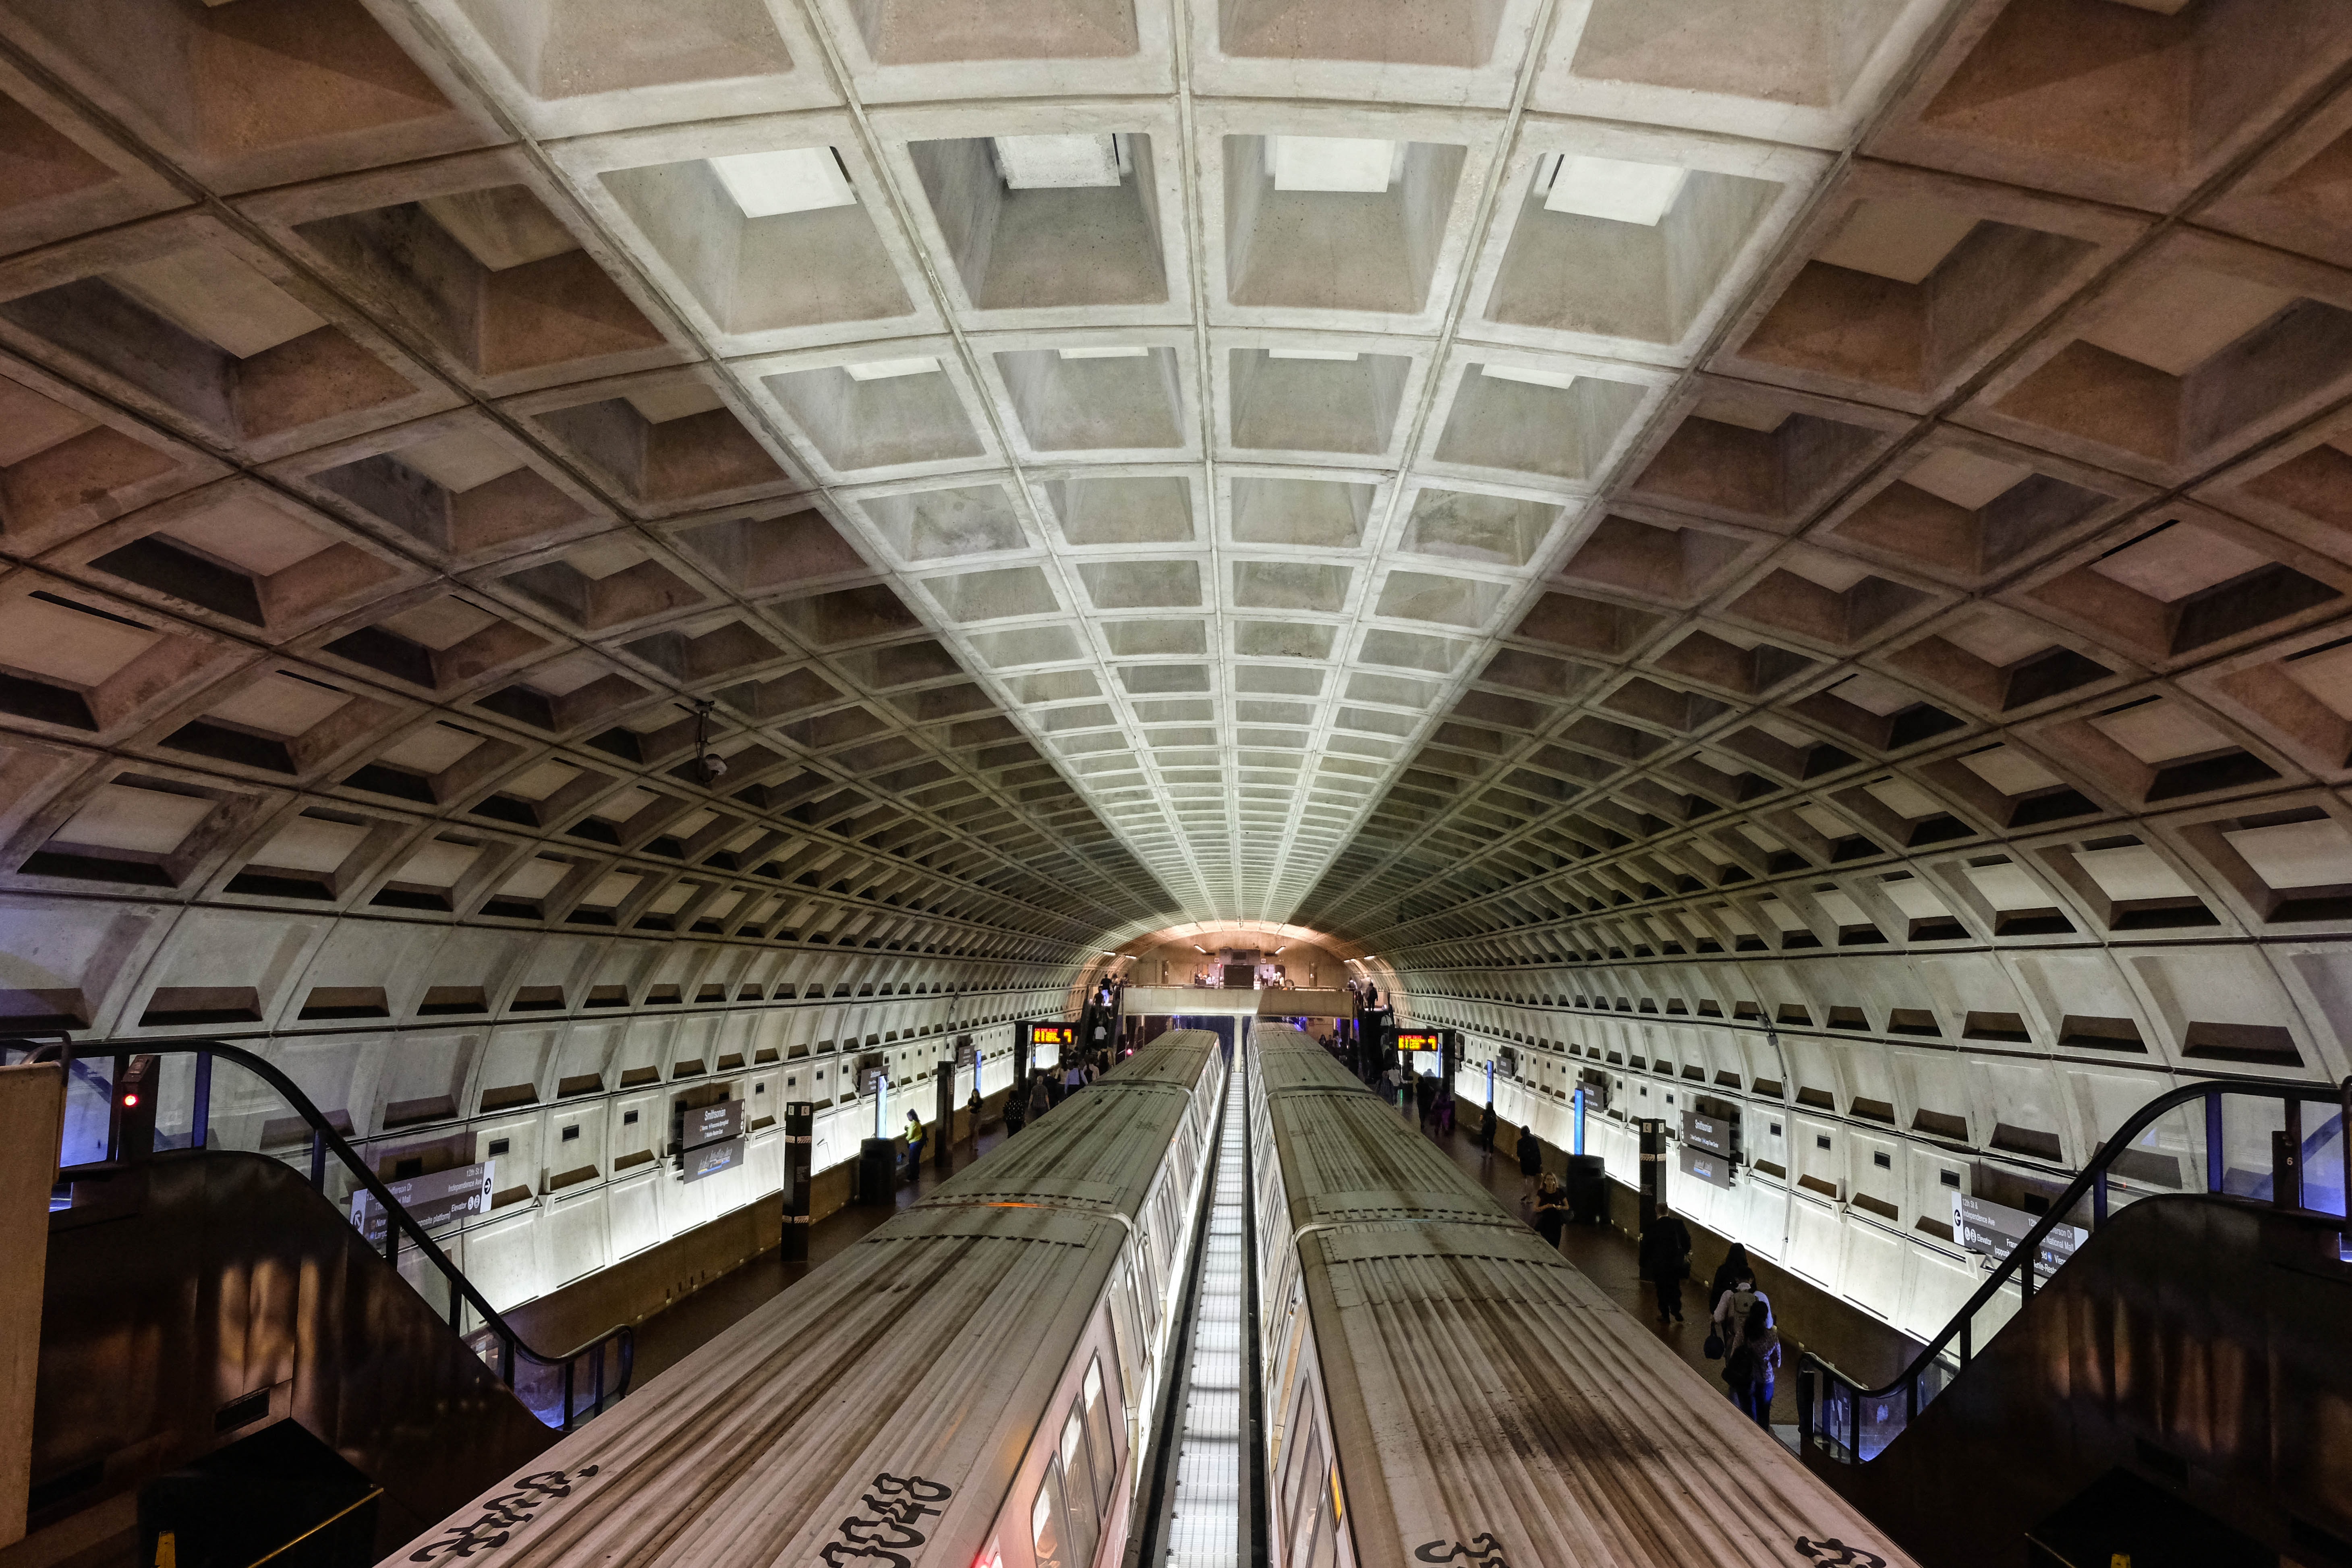 Less than one mile from Rosslyn Metro with access to Blue, Orange and Silver lines